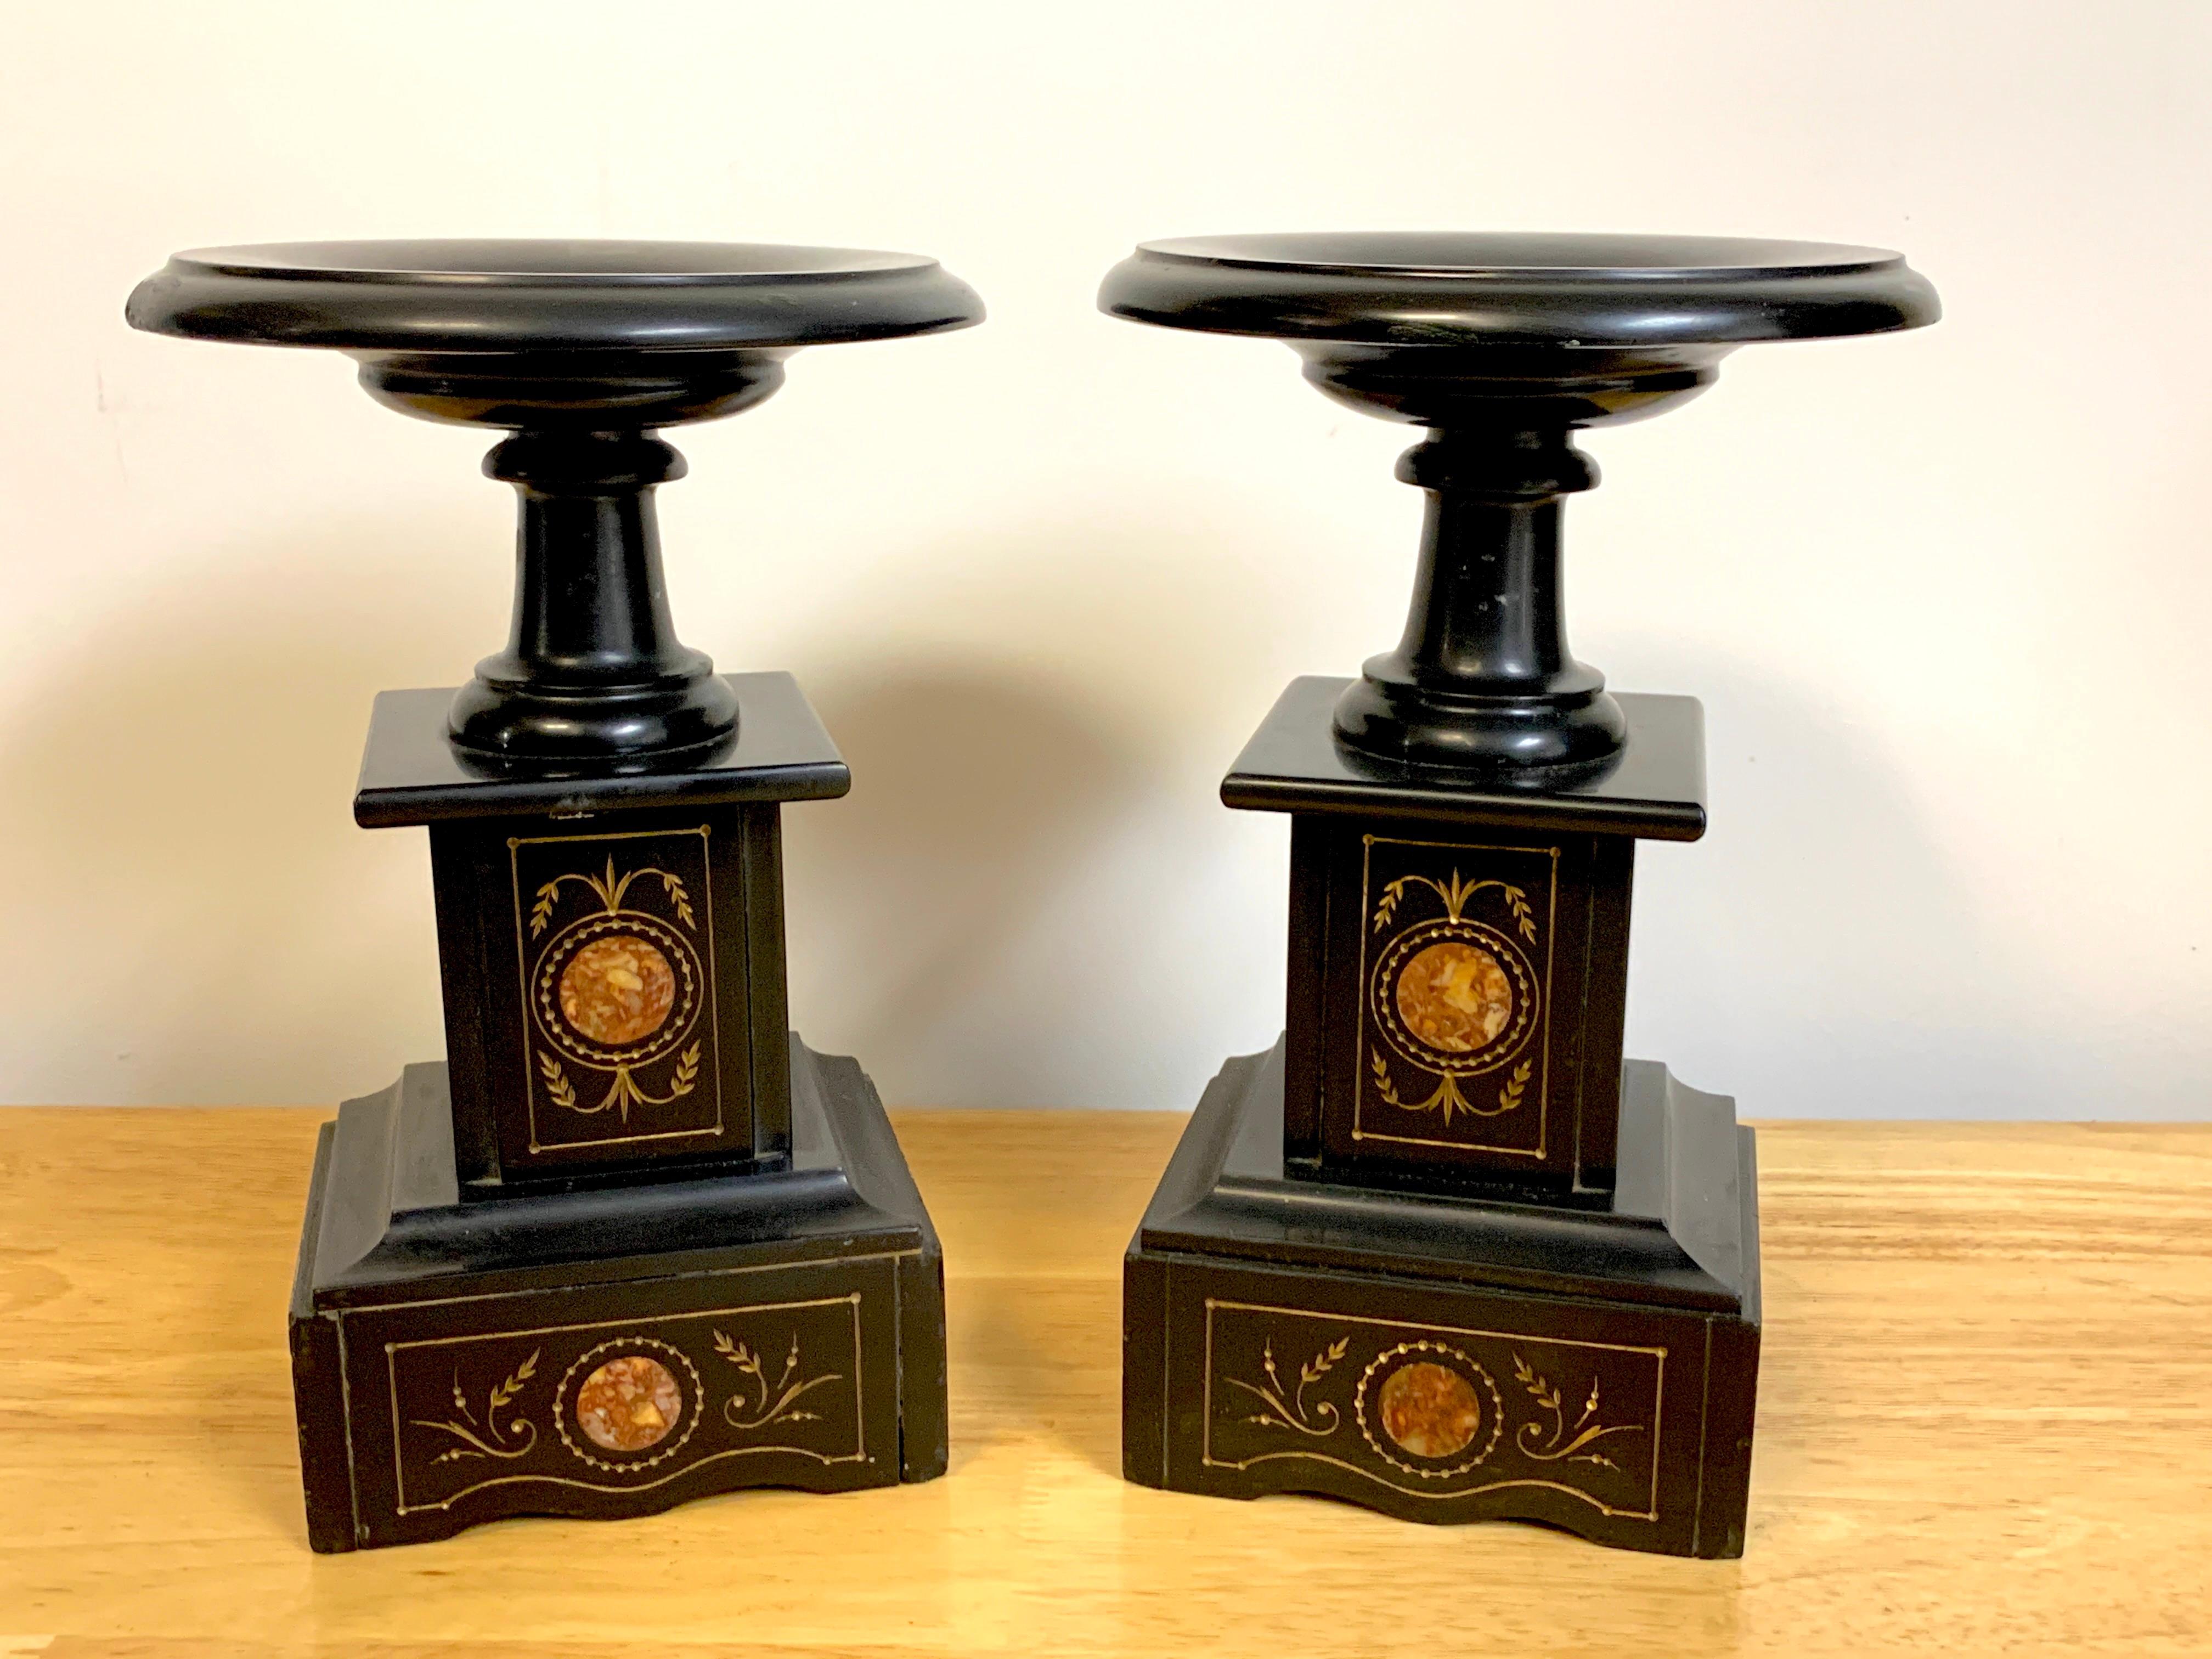 Pair of 19th century Italian Grand Tour inlaid black marble Tazza, each one of typical form with a 6-Inch diameter roundel, raised on an inlaid rose colored marble and gilt incised decoration pedestal base.
The 'dish' is 6-Inches in diameter, the